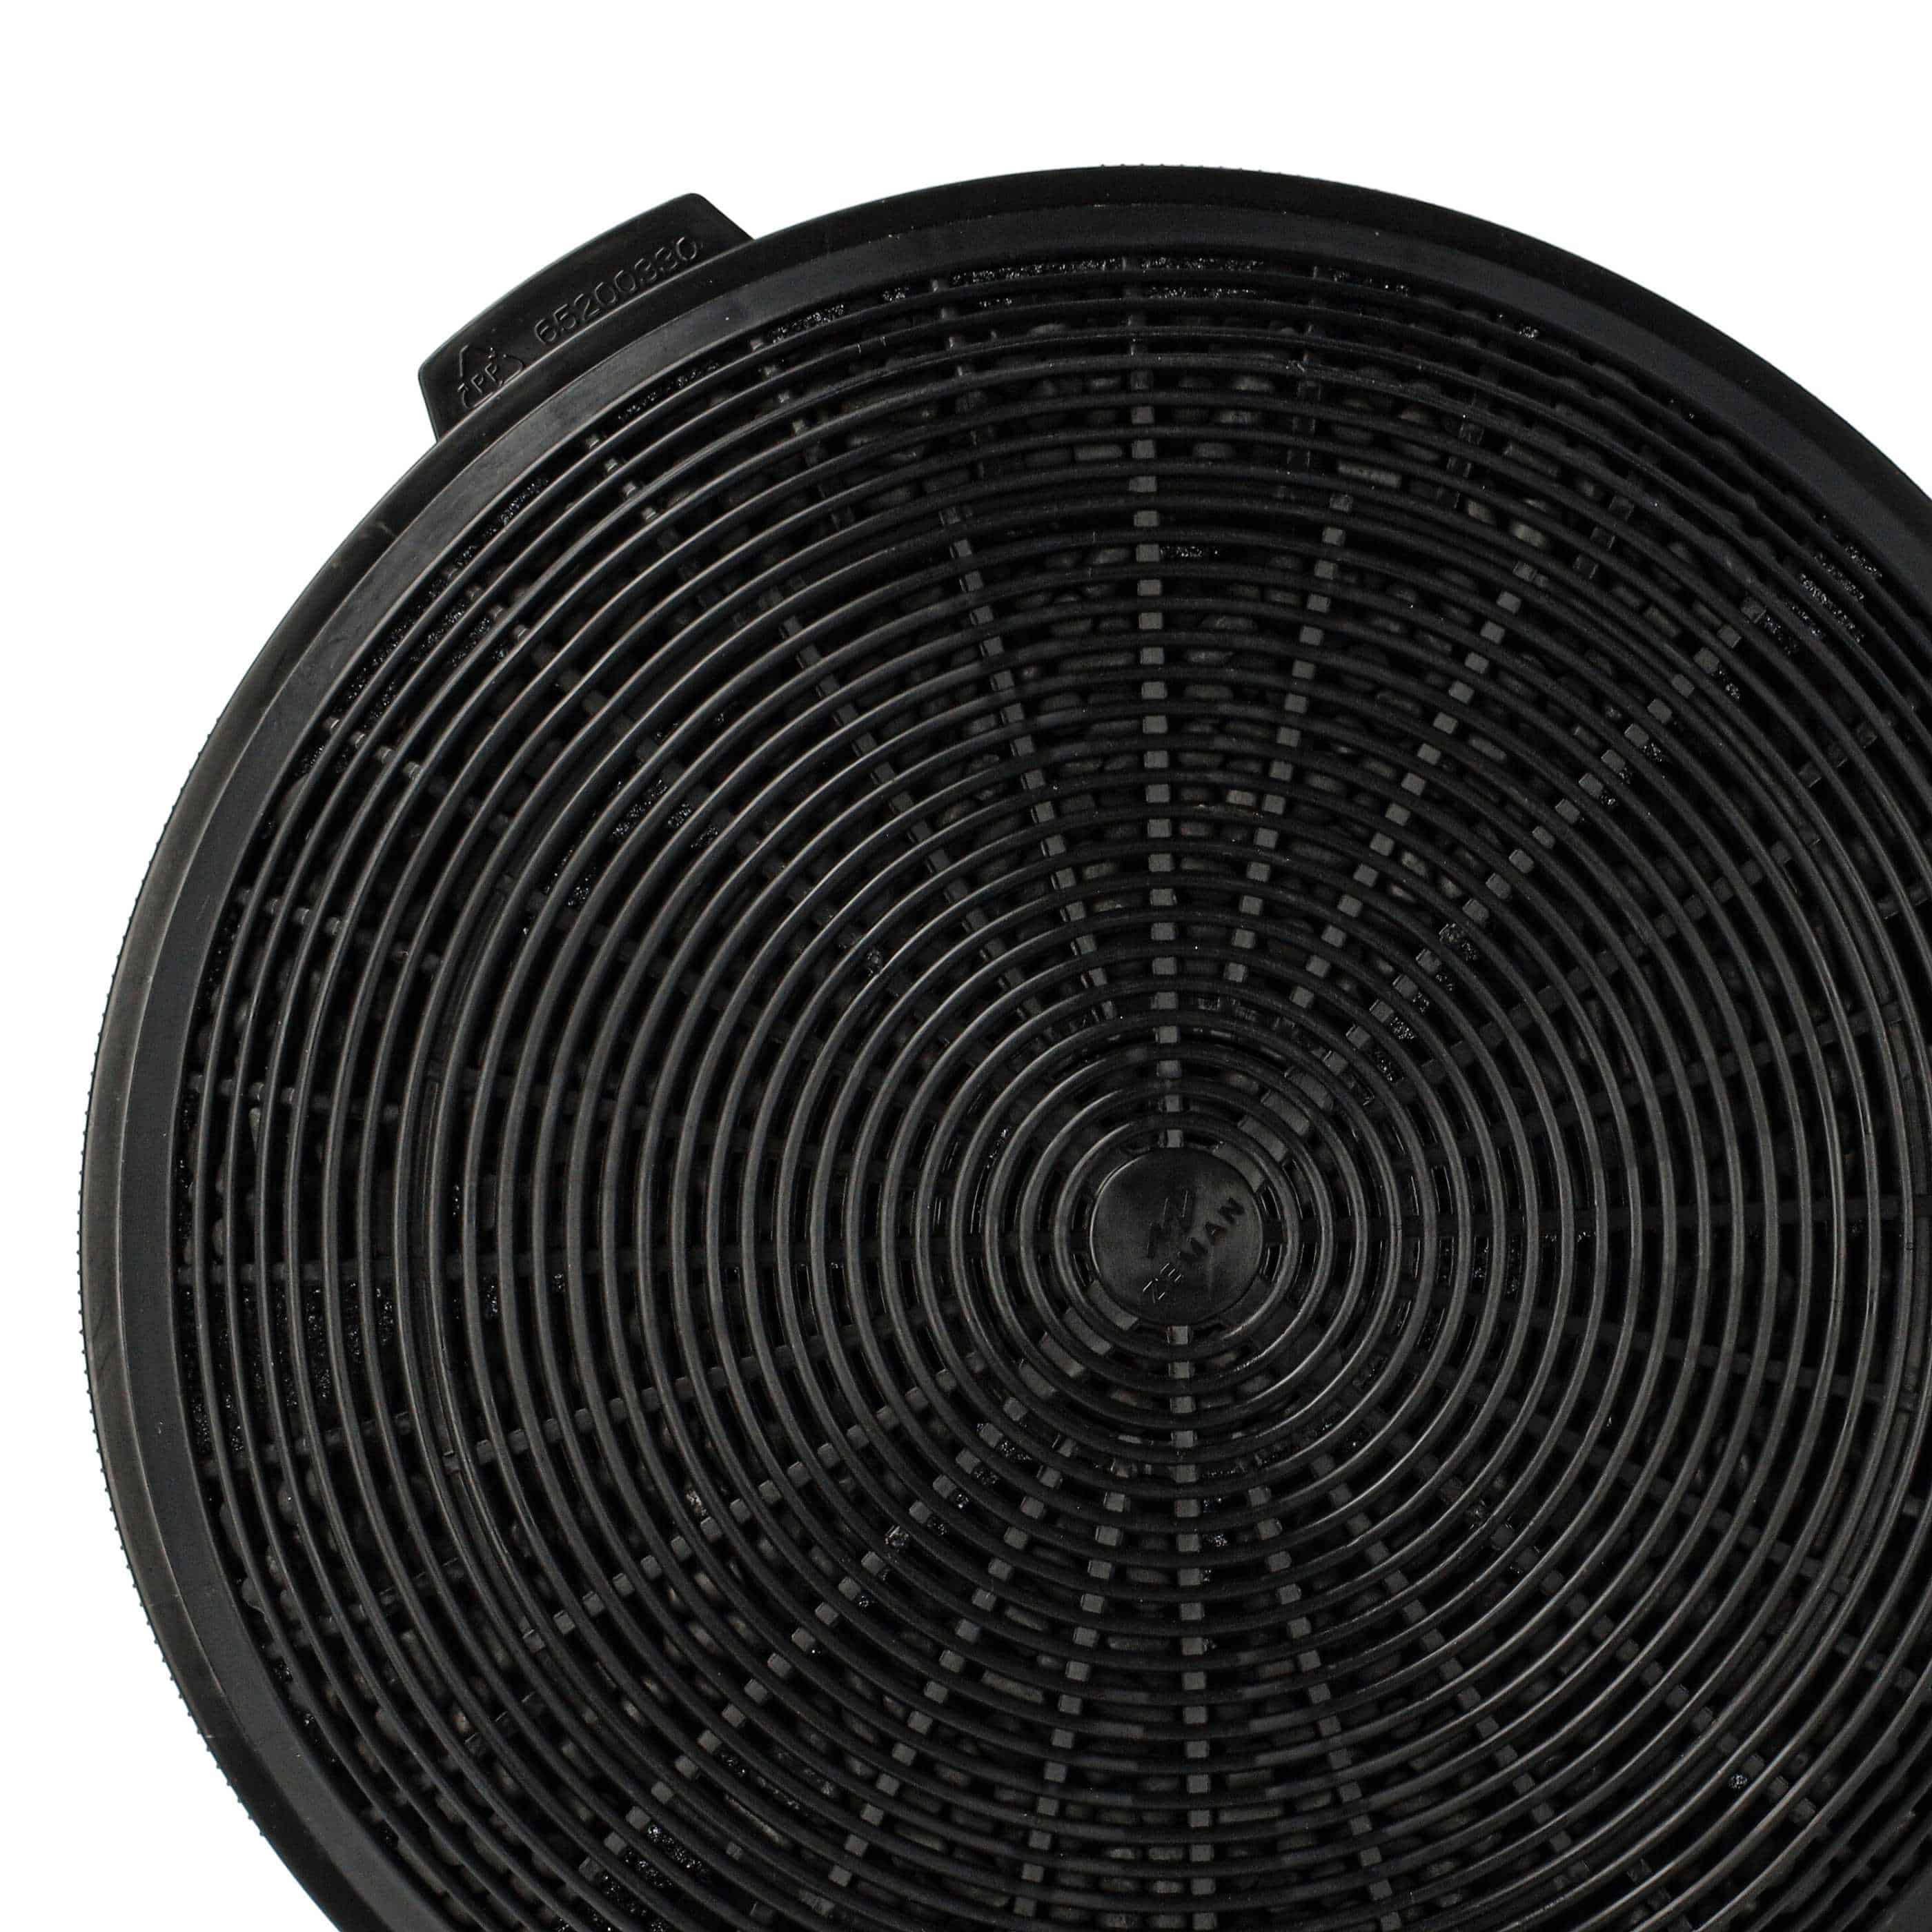 Activated Carbon Filter as Replacement for Electrolux E251005 for Electrolux Hob etc. - 18.85 cm